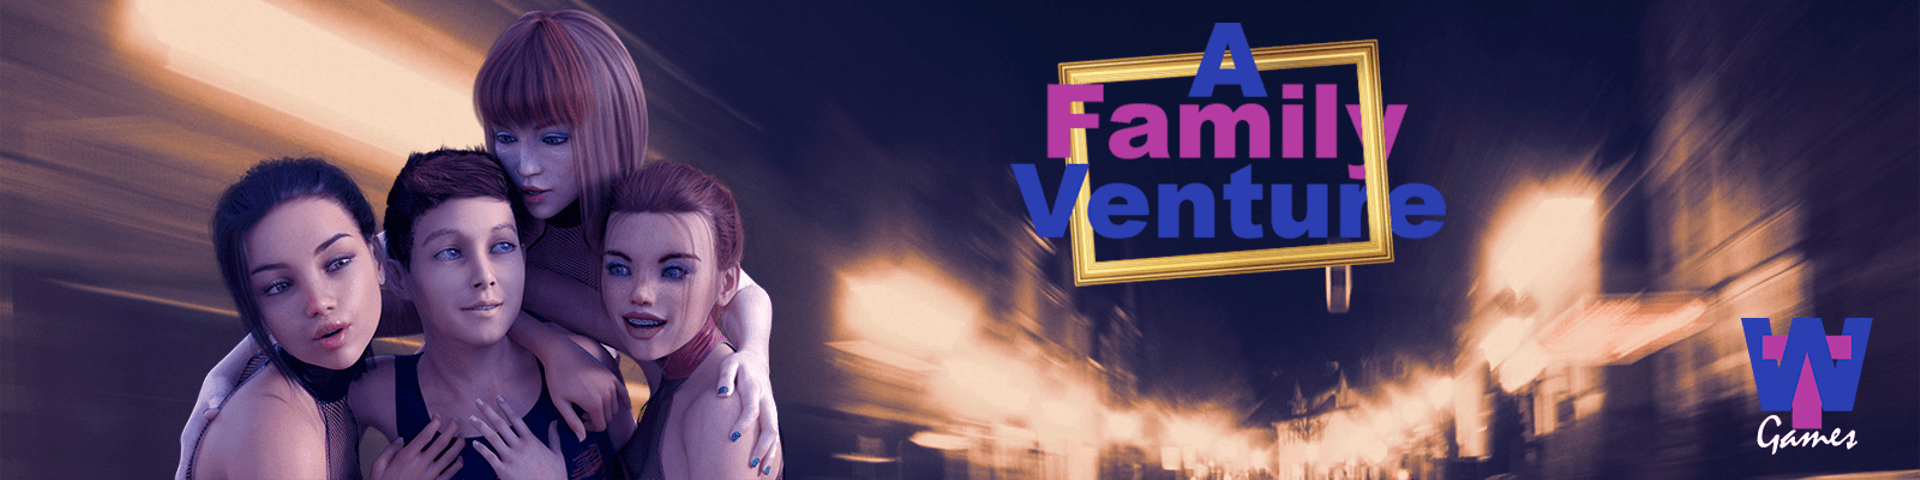 A Family Venture – Version 0.05b - Patreon incest adult game 1